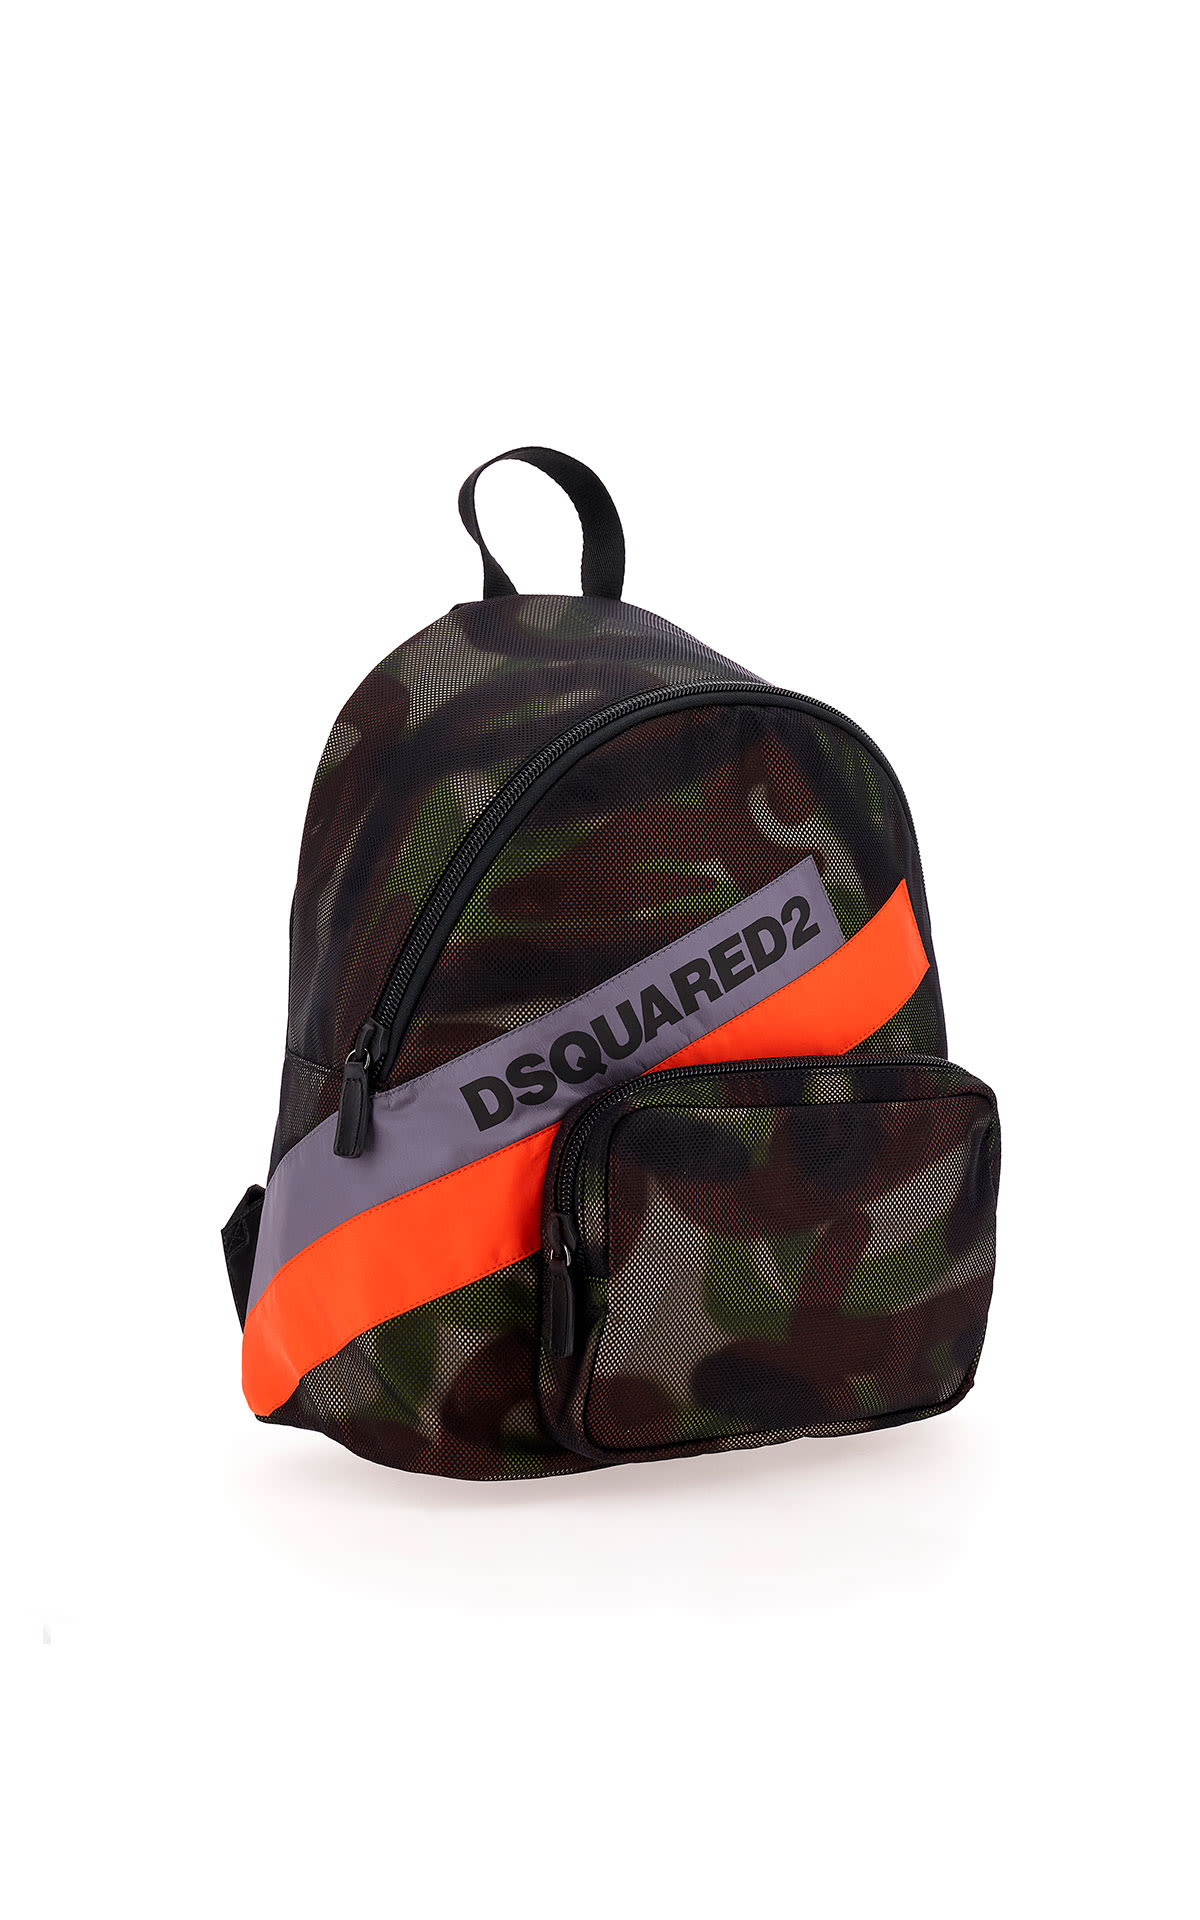 Military print backpack Dsquared2